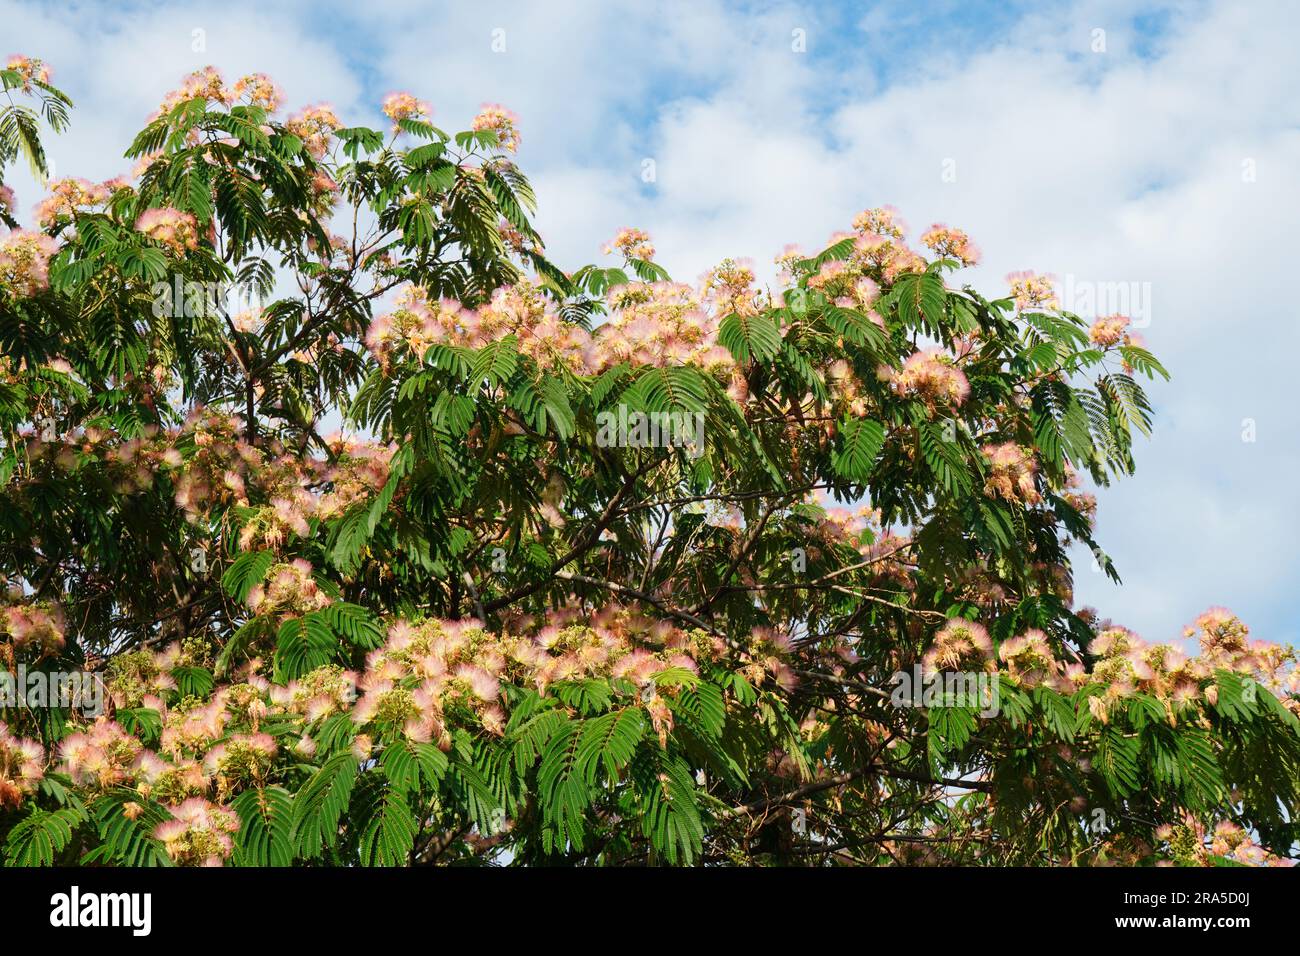 Flowering mimosa tree with pink fragrant flowers on blue sky with white clouds in summer Stock Photo